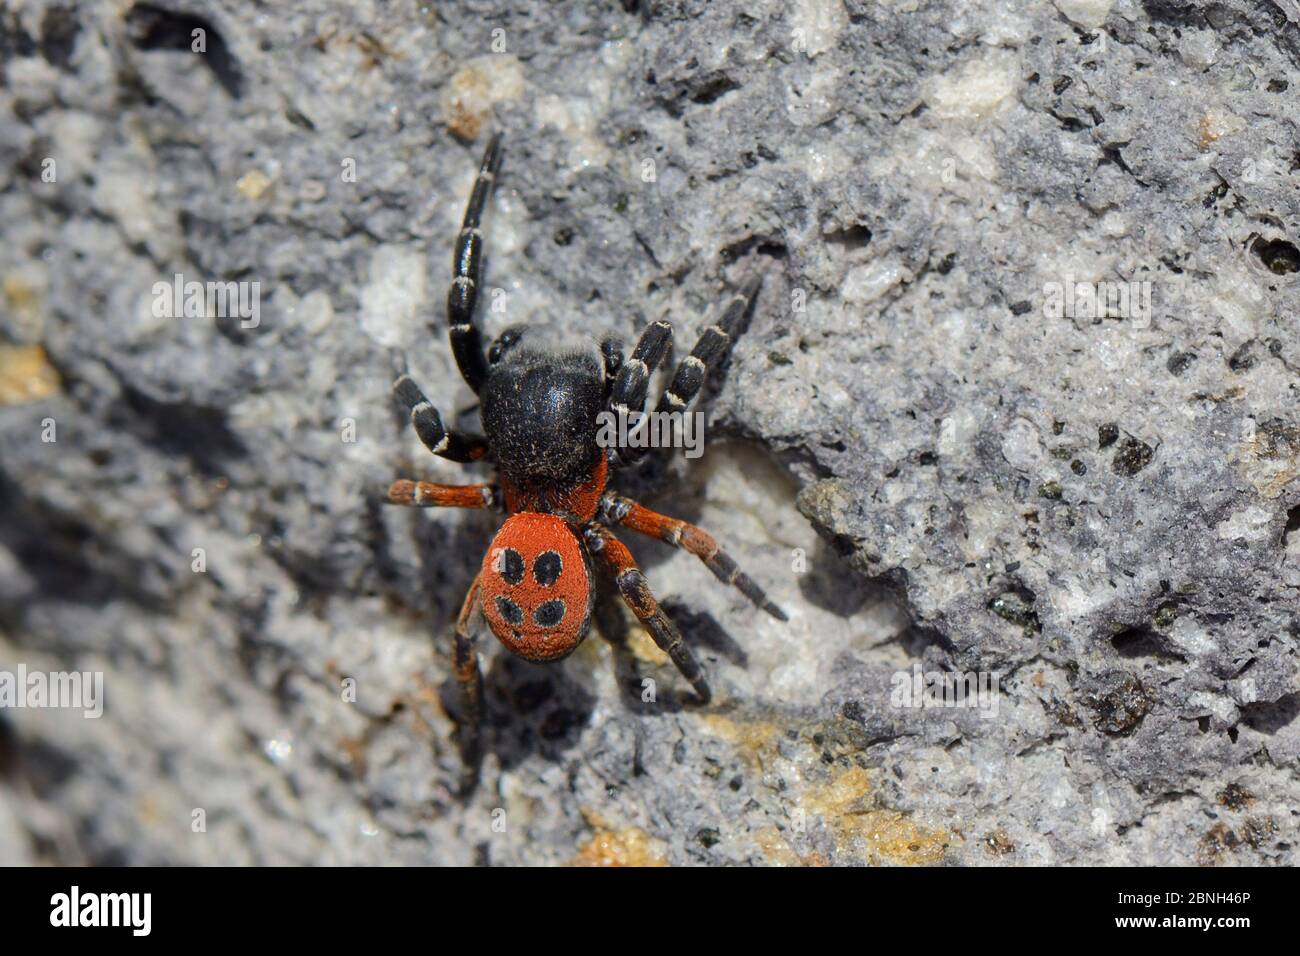 Male Ladybird spider (Eresus cinnaberinus / niger) searching for females on a rock face, Lesbos / Lesvos, Greece, May. Stock Photo